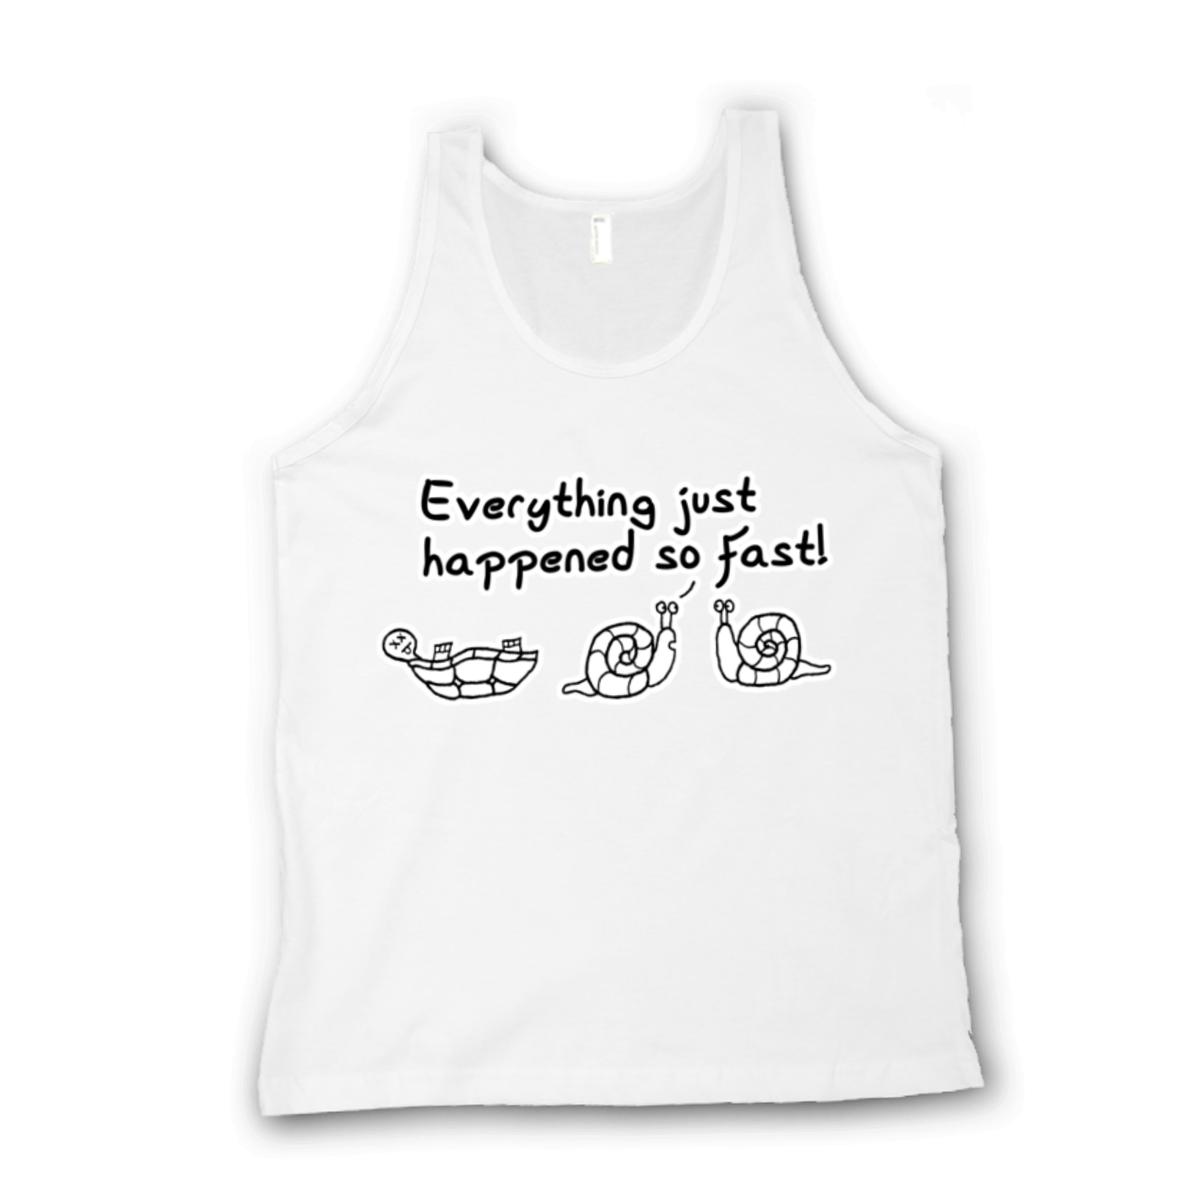 Happened So Fast Unisex Tank Top Small white